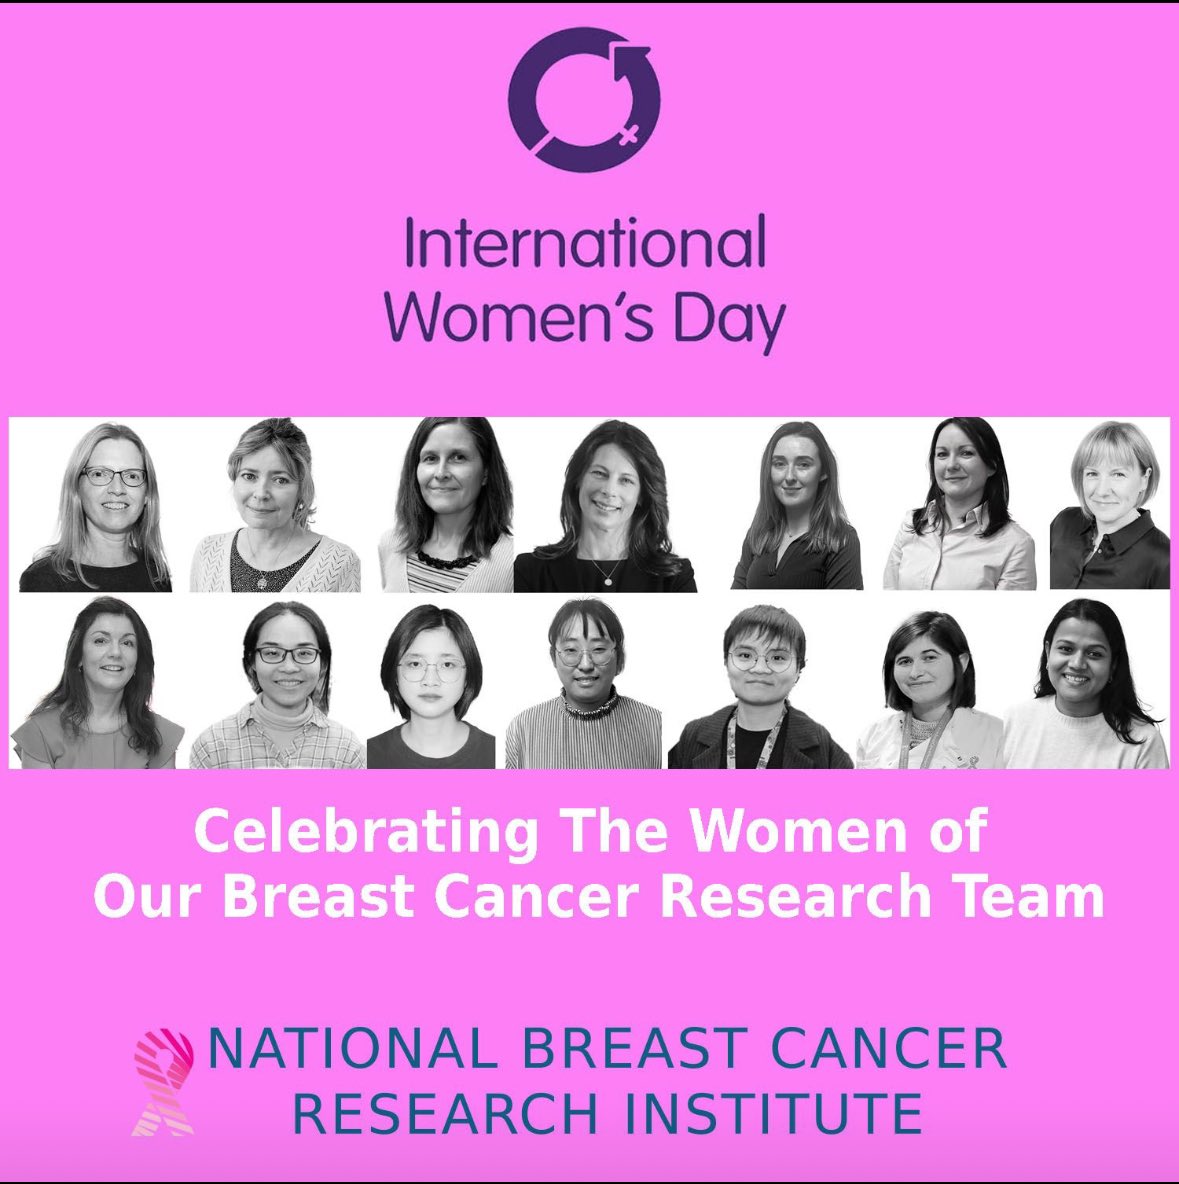 This International Women’s Day, we celebrate the incredible women of our breast cancer research team. #internationalwomensday